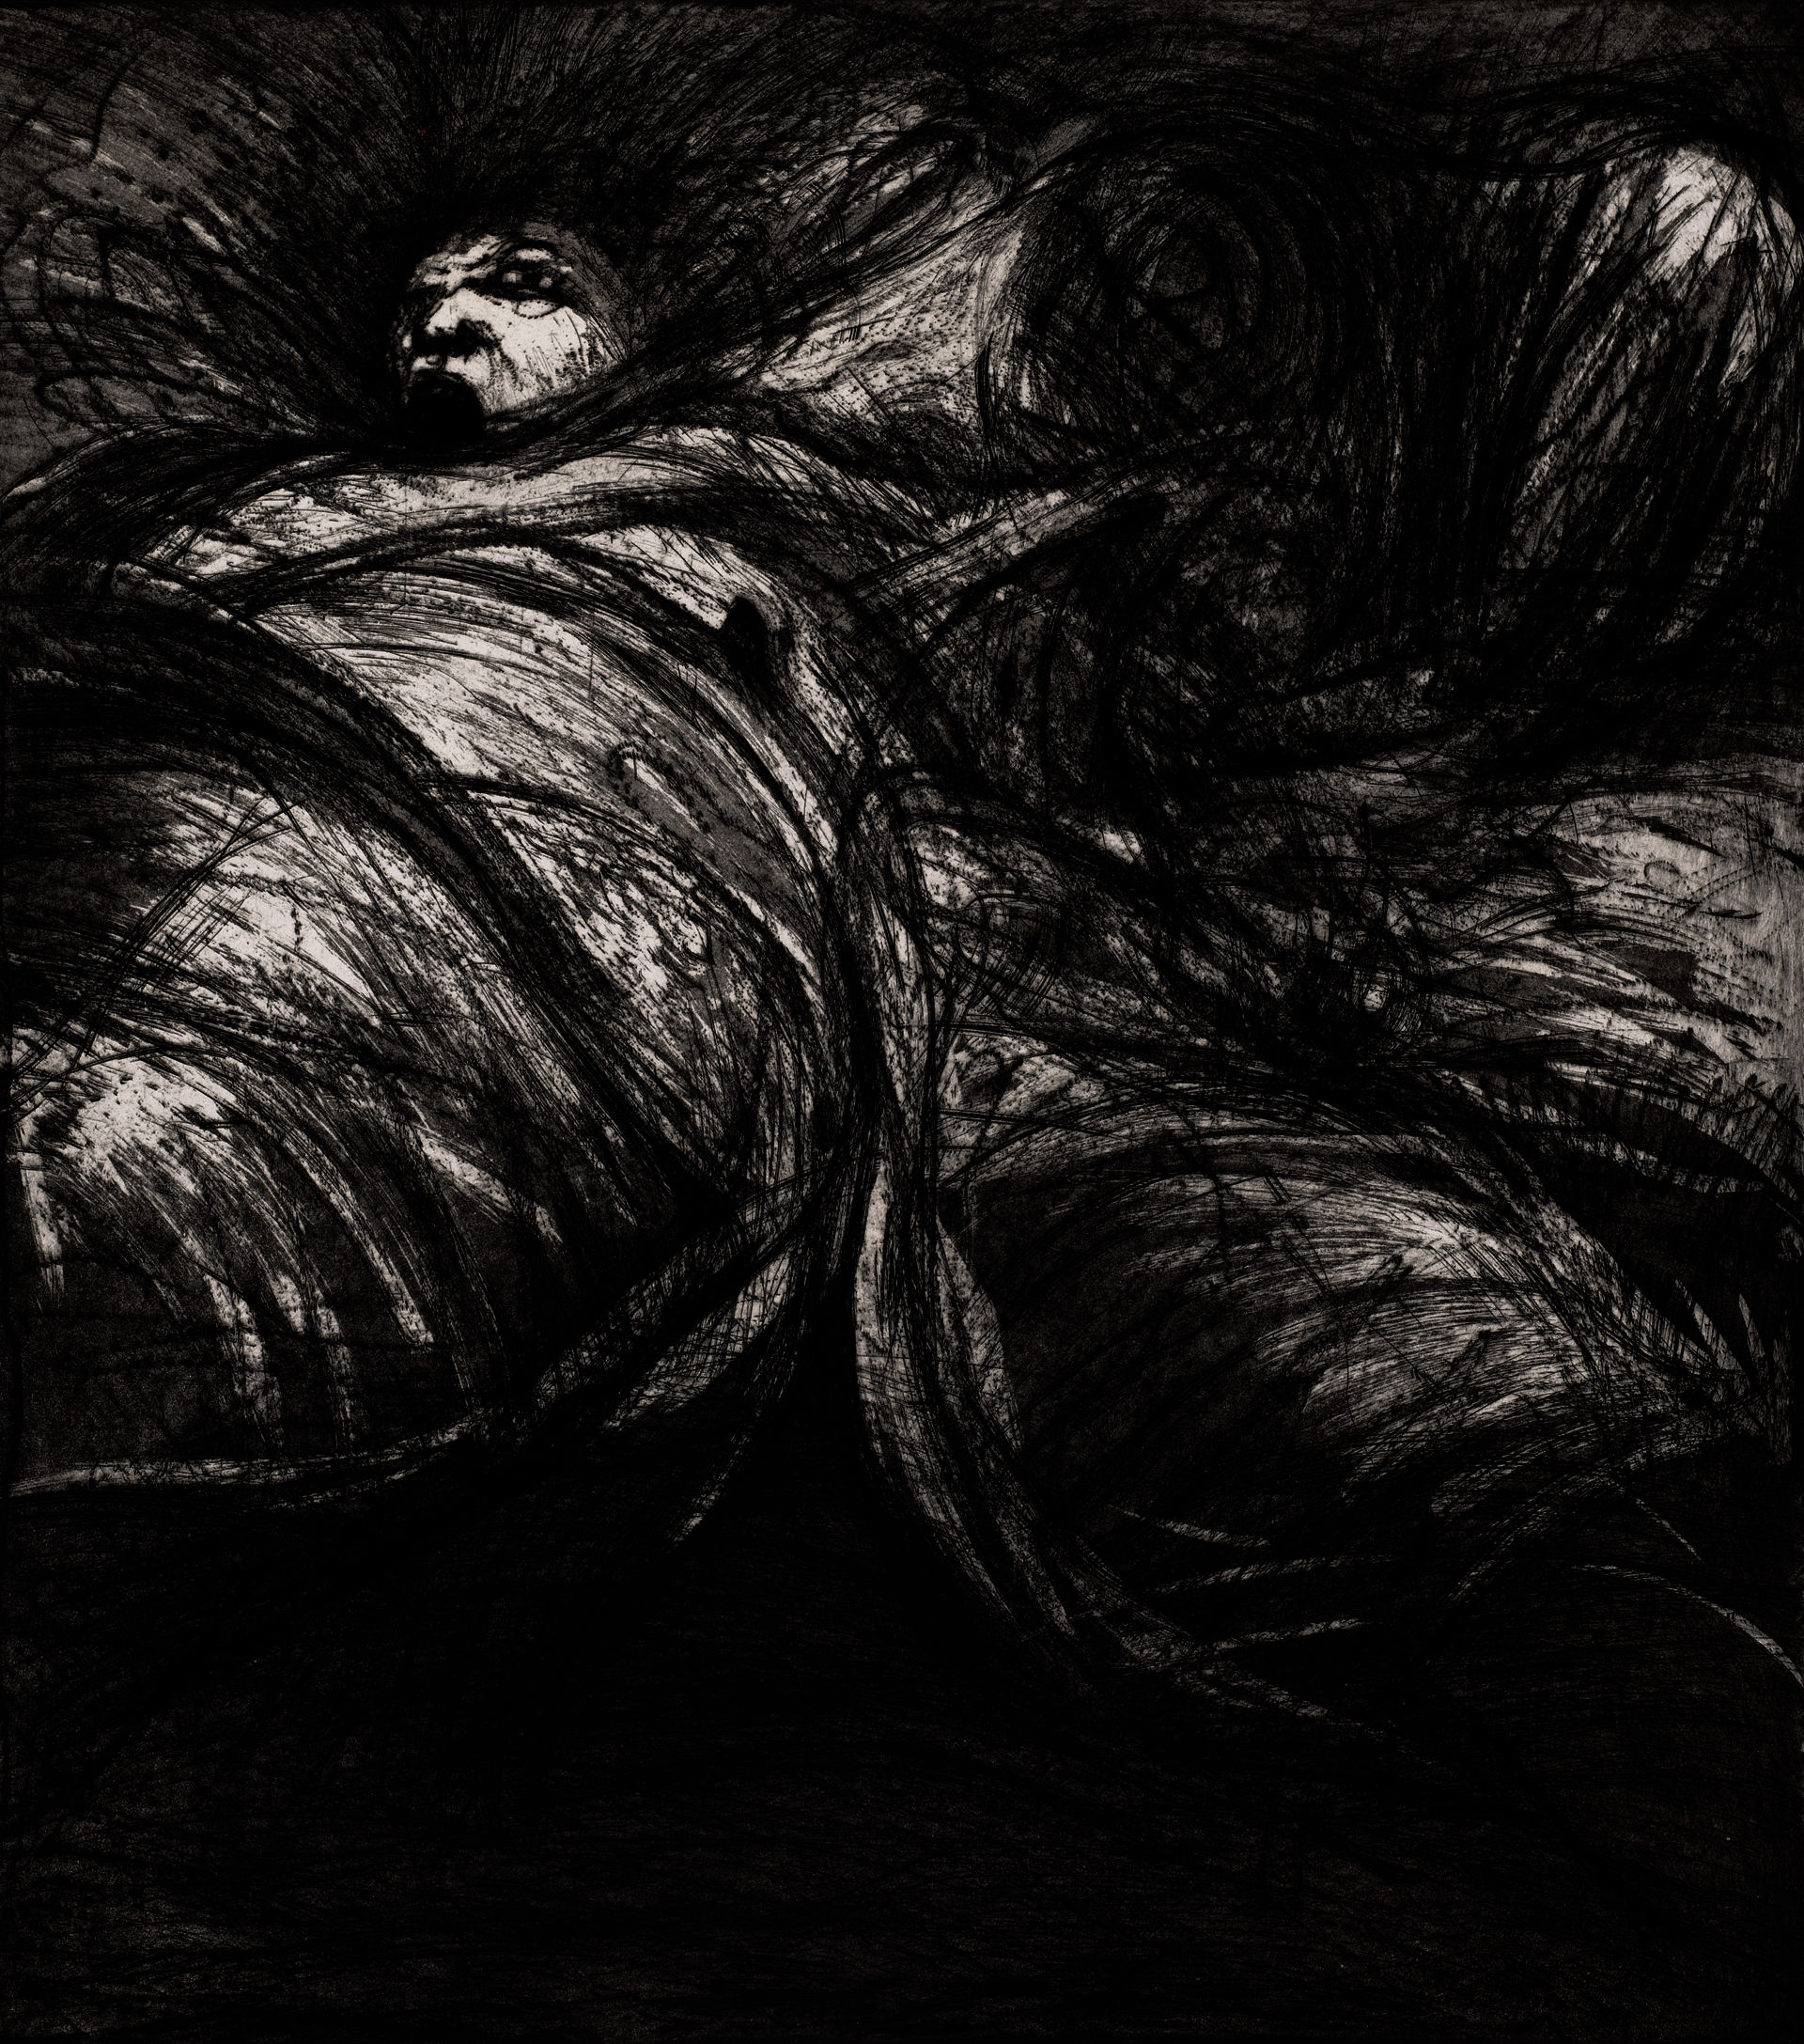 An energetic etching composed of large scrawled strokes depicts a screaming man, collapsed, and wrapped in cloth.